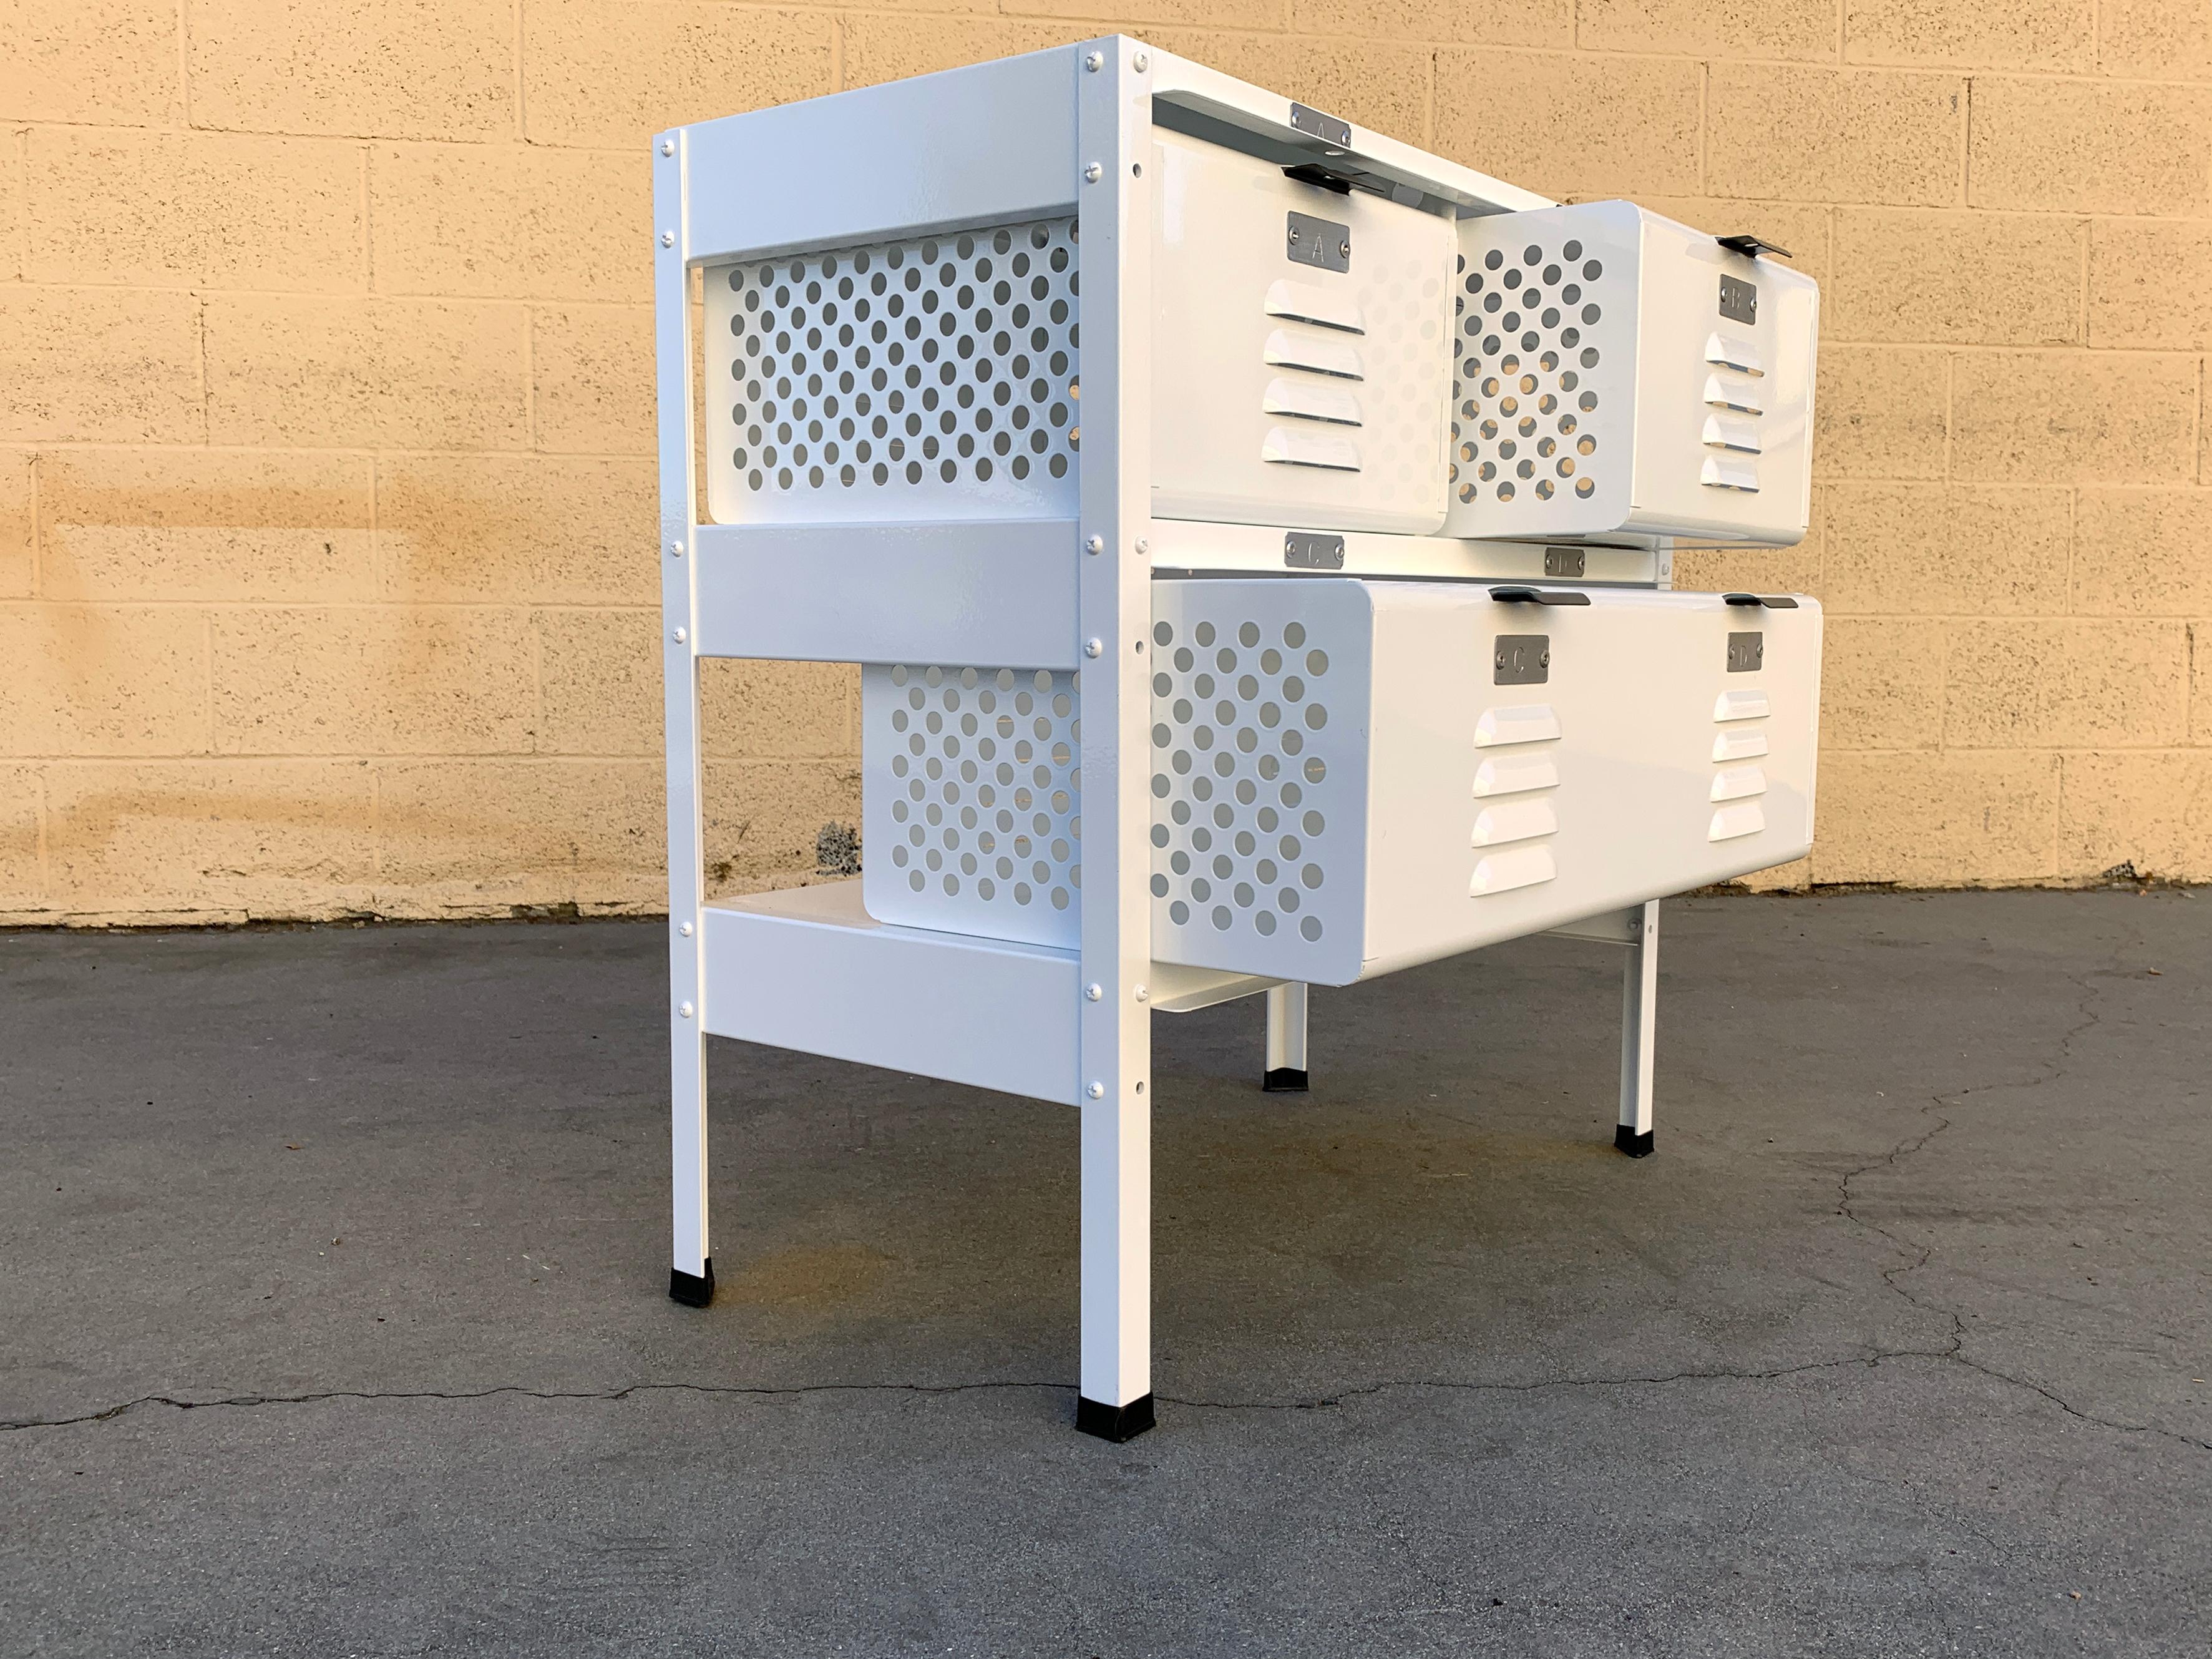 Mid-Century Modern 2 x 2 Locker Basket Unit in White on White, Newly Fabricated to Order For Sale